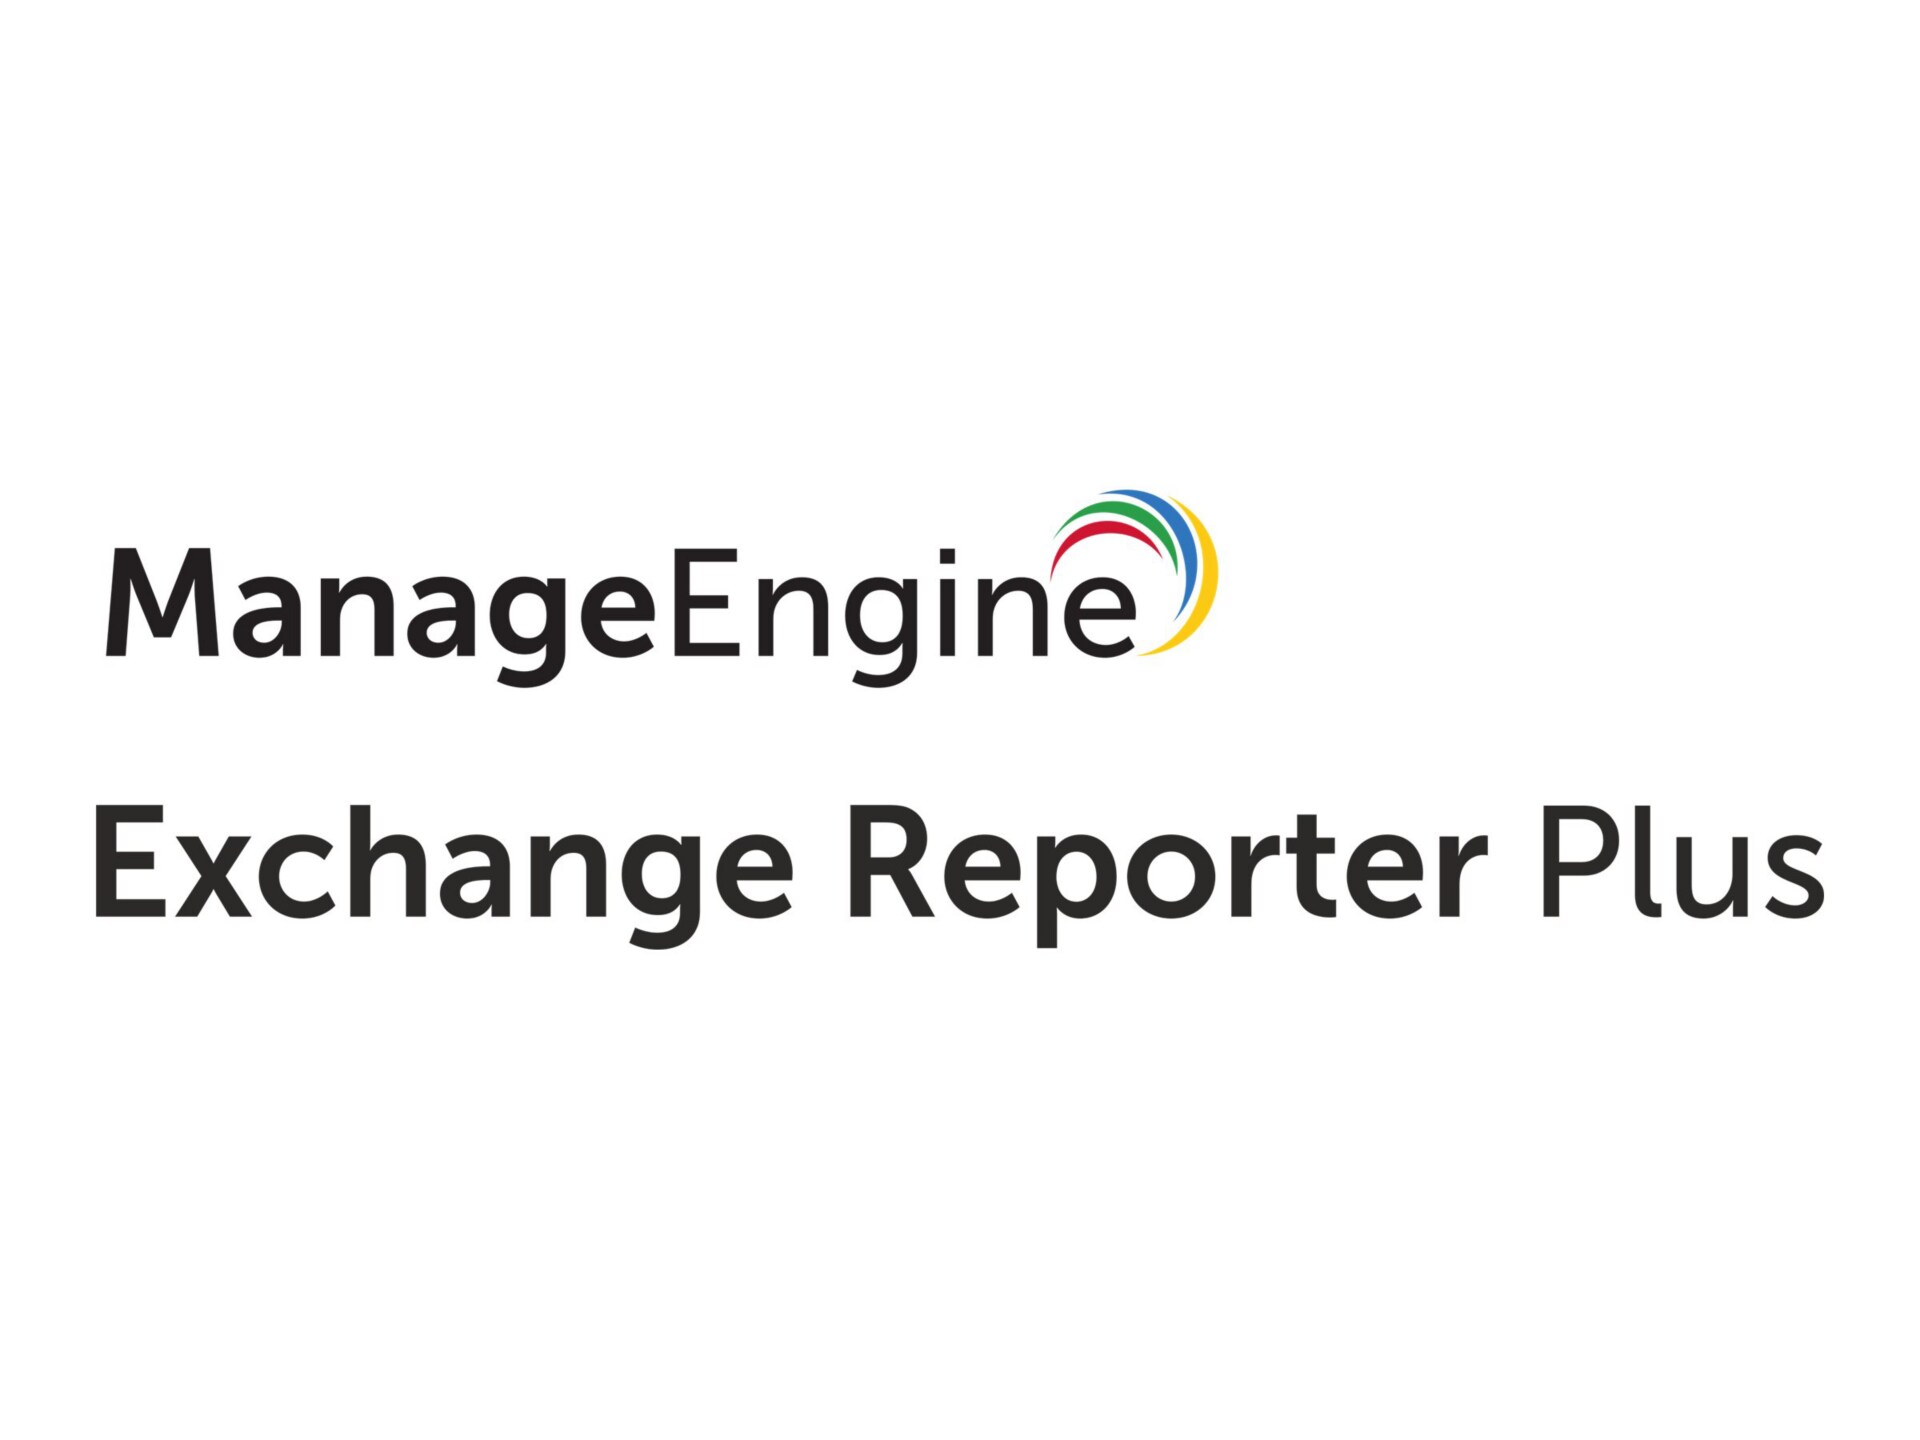 ManageEngine Exchange Reporter Plus Professional Edition - subscription license (1 year) - 10000 mailboxes